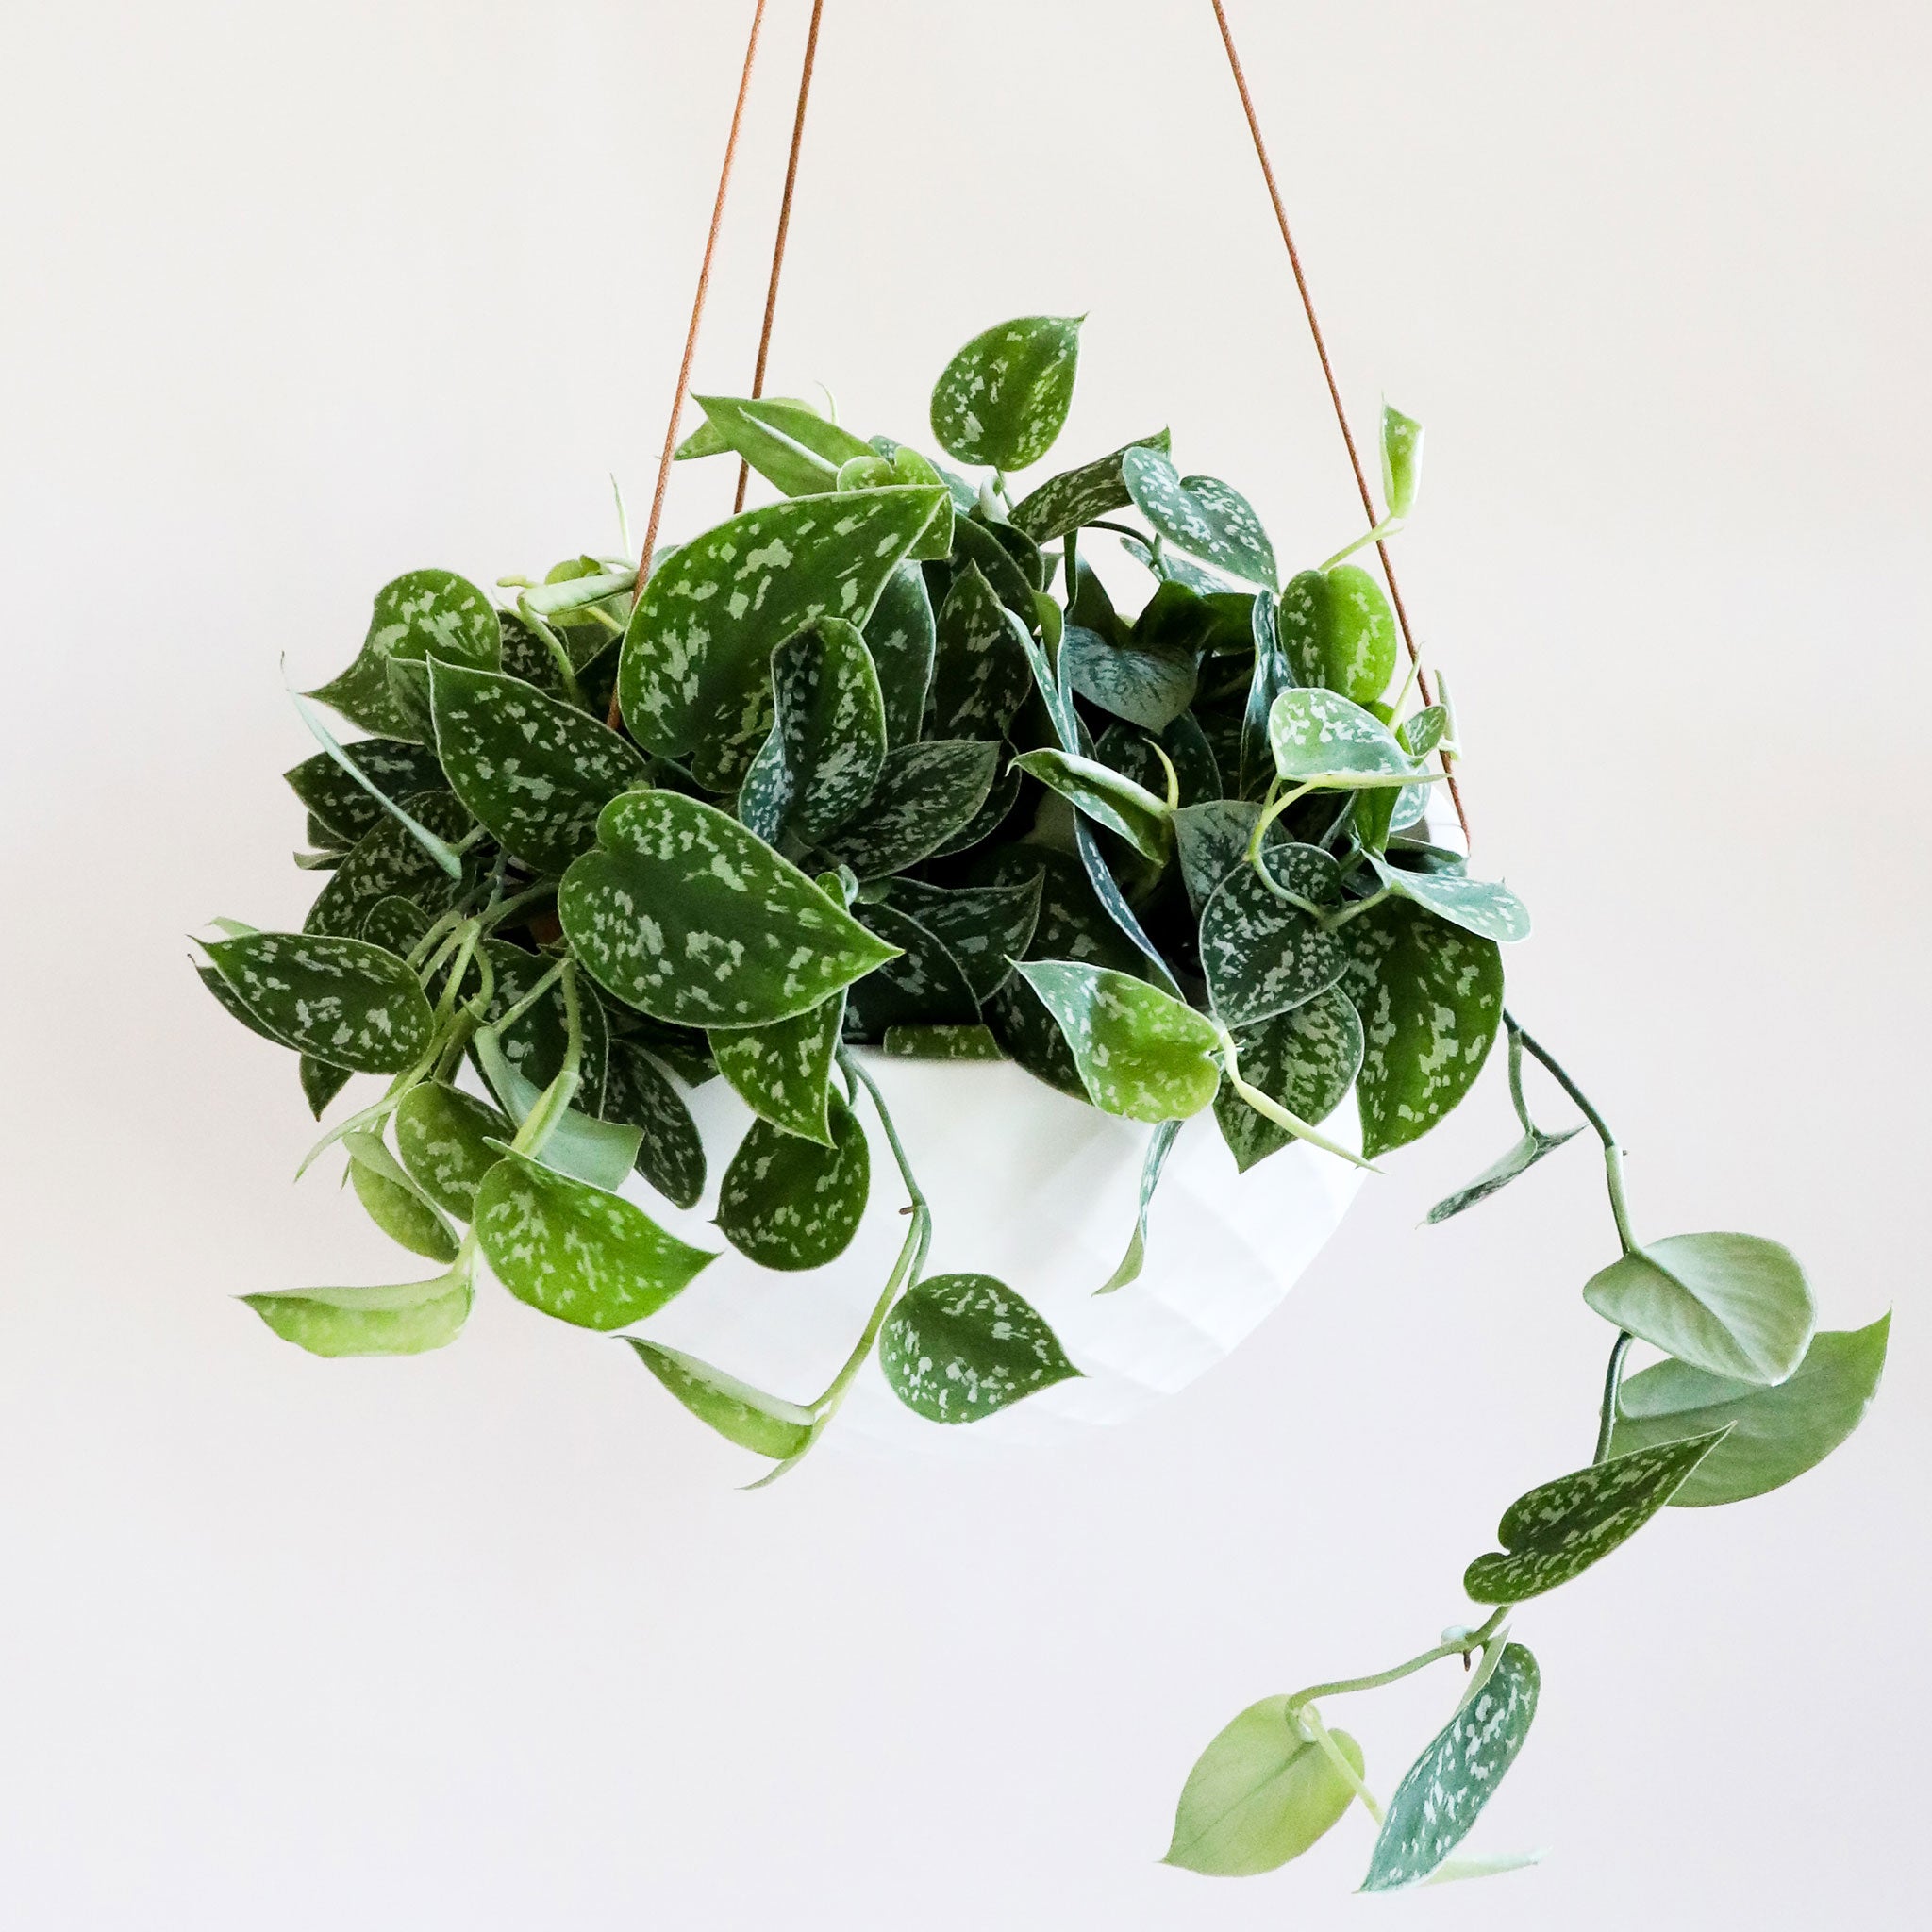 Hanging in front of a white background is a rounded white pot being held by three brown leather ropes. Inside the pot is a satin pictus. The plant has long stems that fall down the sides of the pot. On the stems are wide leaves with a pointed end. There are silver specks on the top of the leaves.